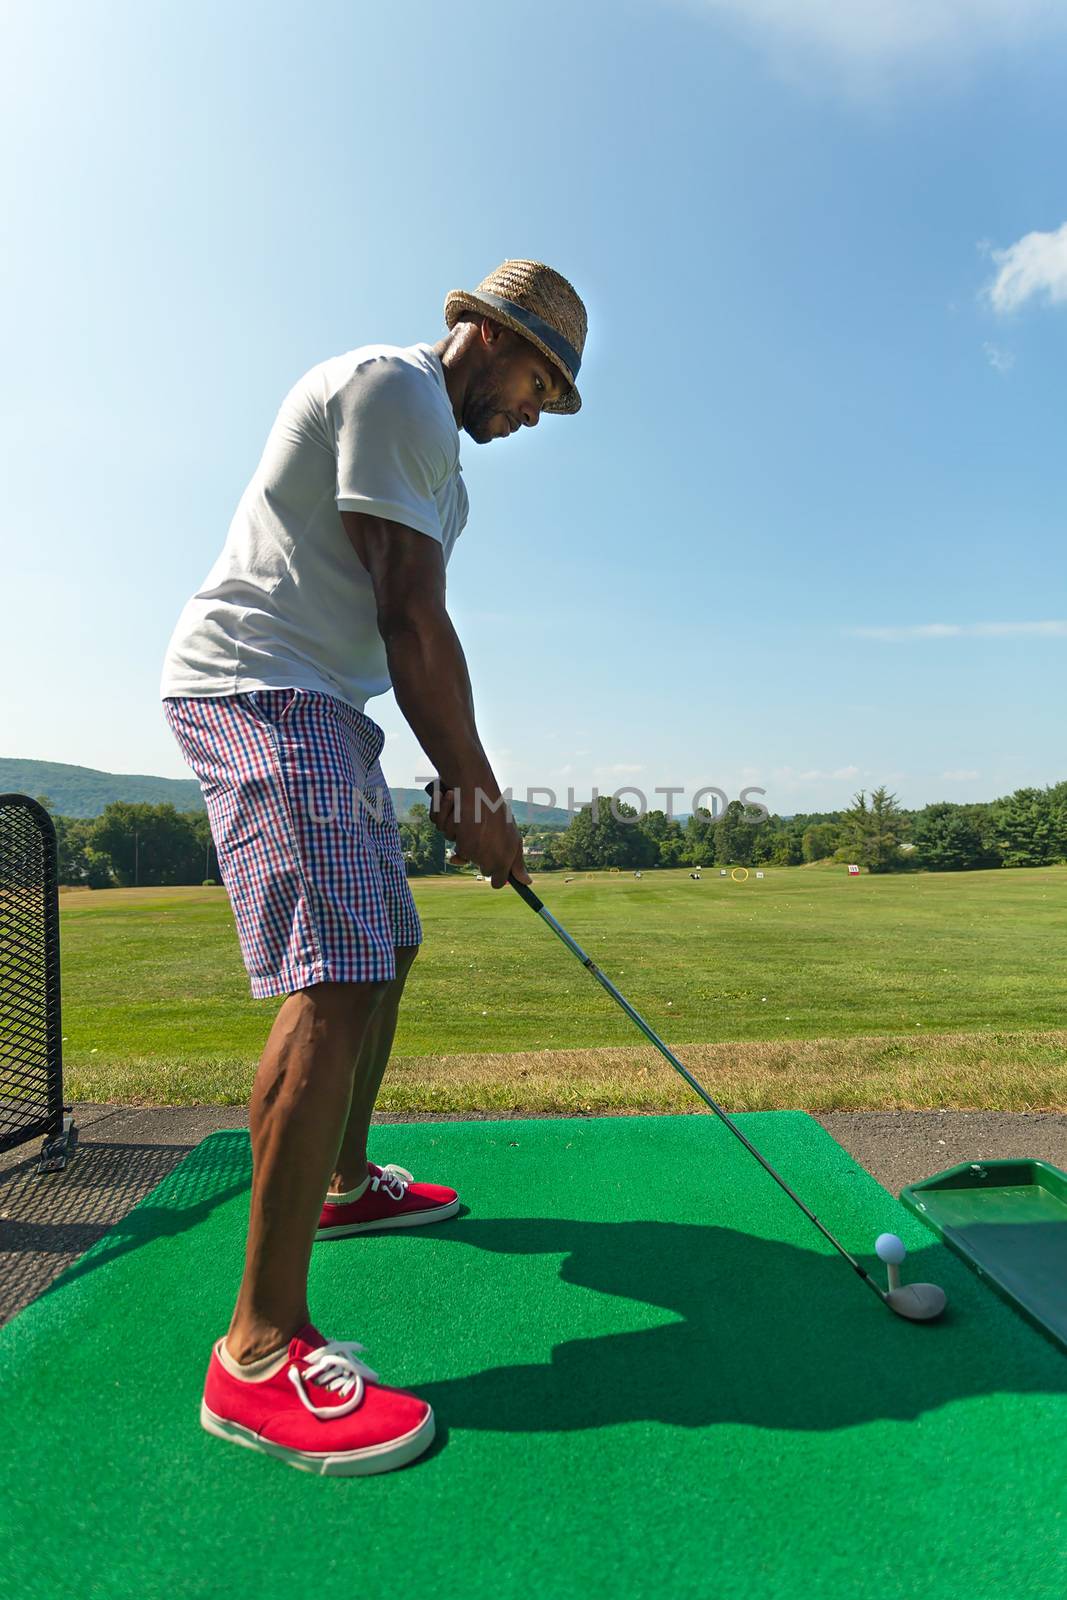 Athletic golfer teeing up at the driving range dressed in casual attire.